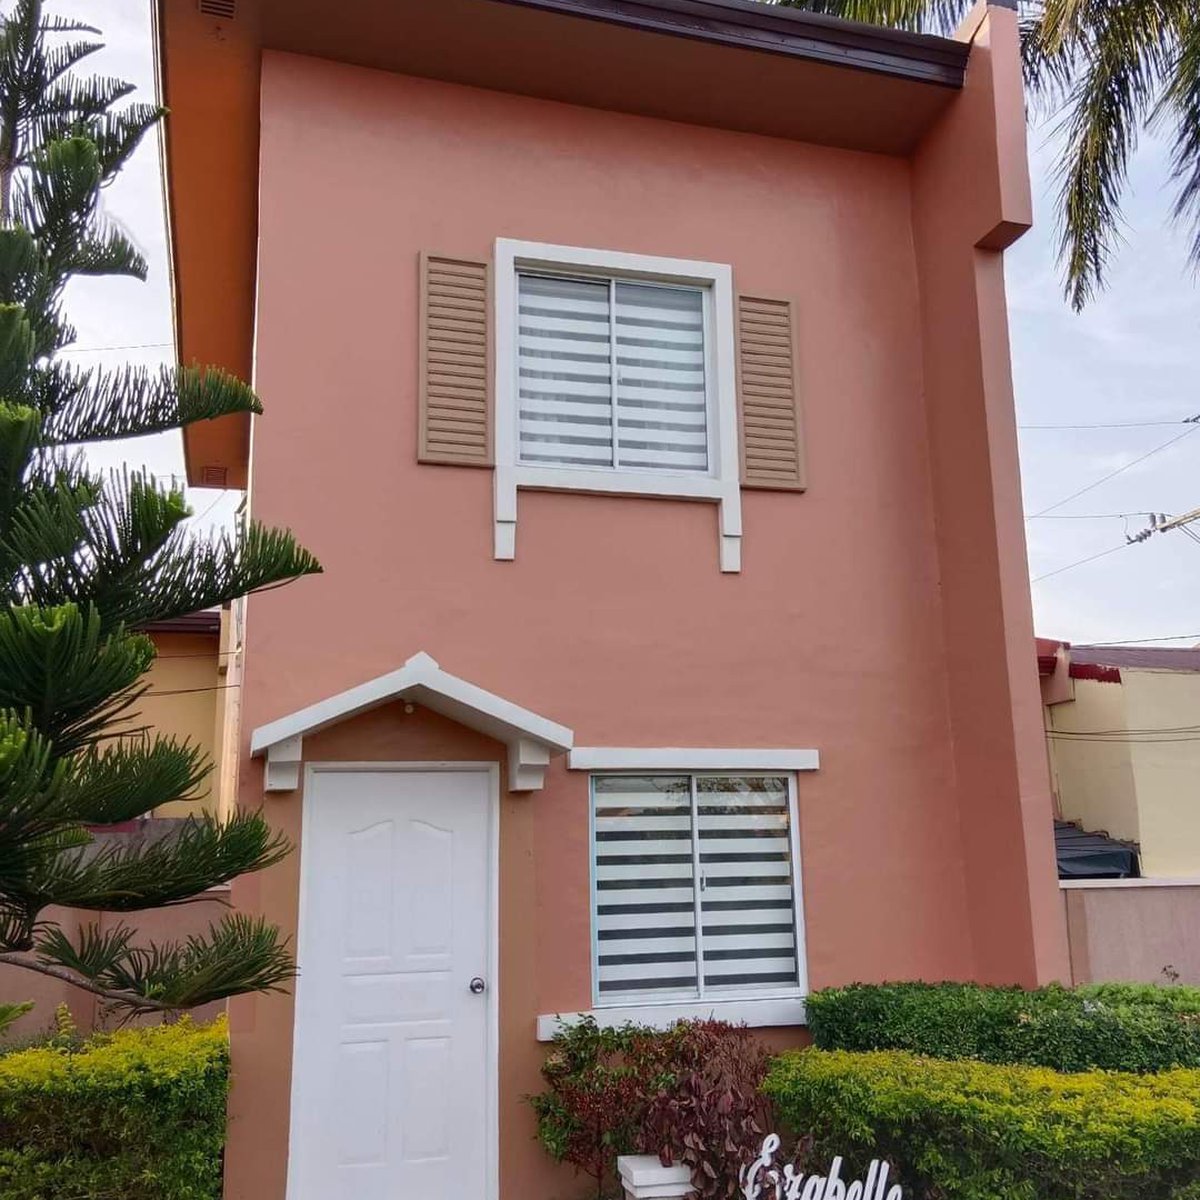 2 Bedroom Single Attached House For Sale in Alfonso Cavite